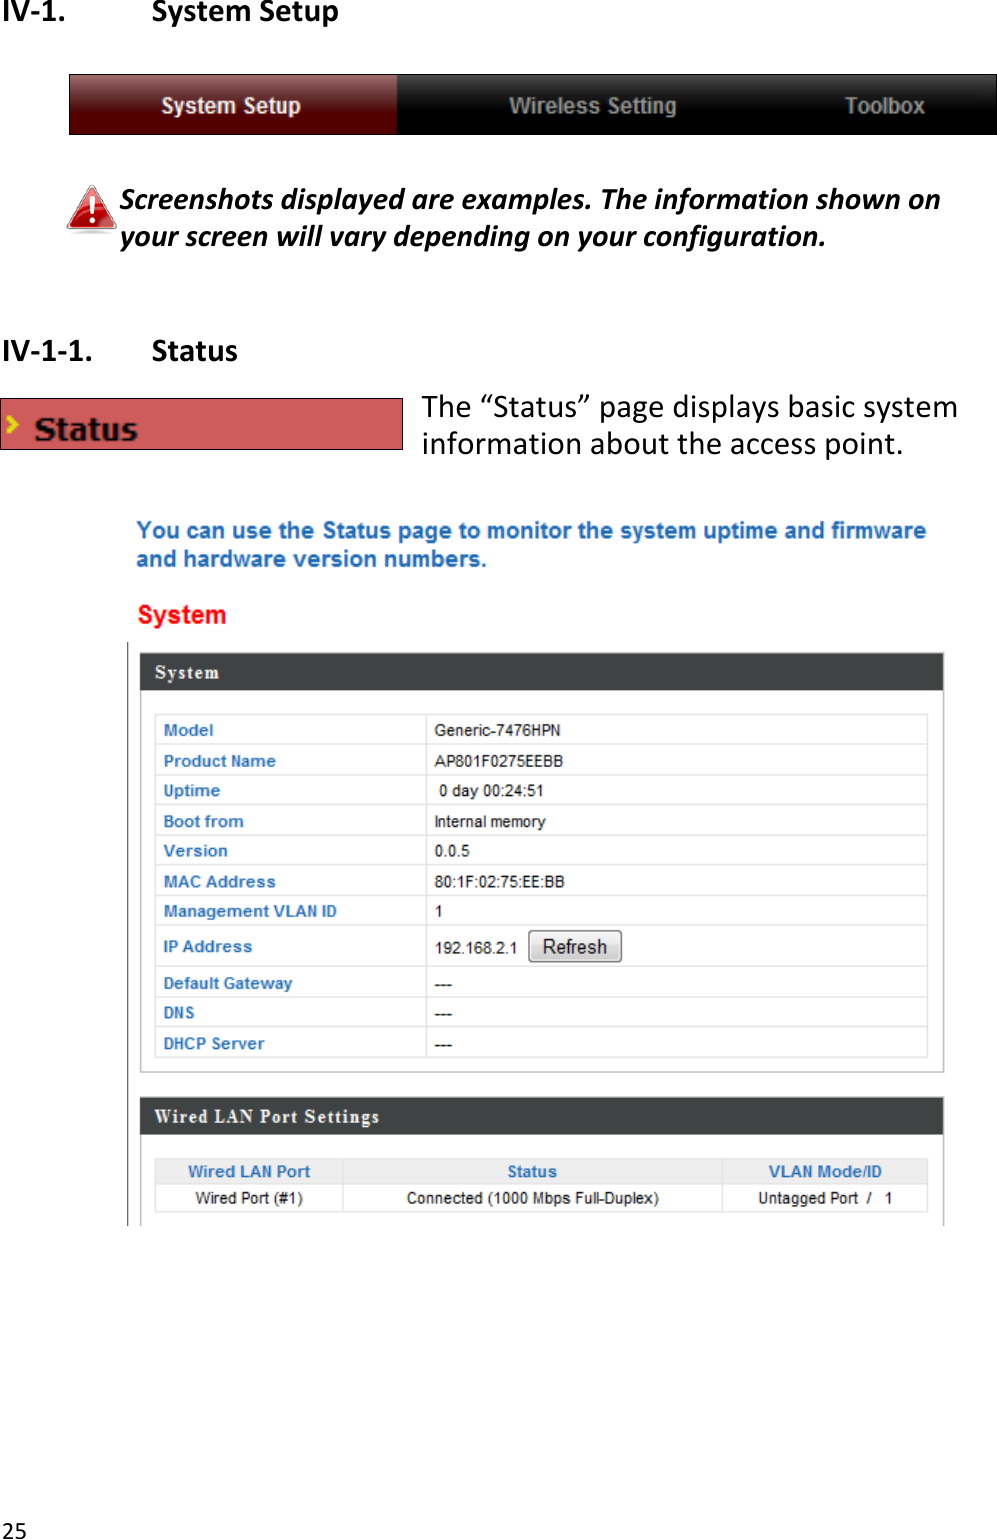 25  IV-1.    System Setup    Screenshots displayed are examples. The information shown on your screen will vary depending on your configuration.  IV-1-1.   Status The “Status” page displays basic system information about the access point.        